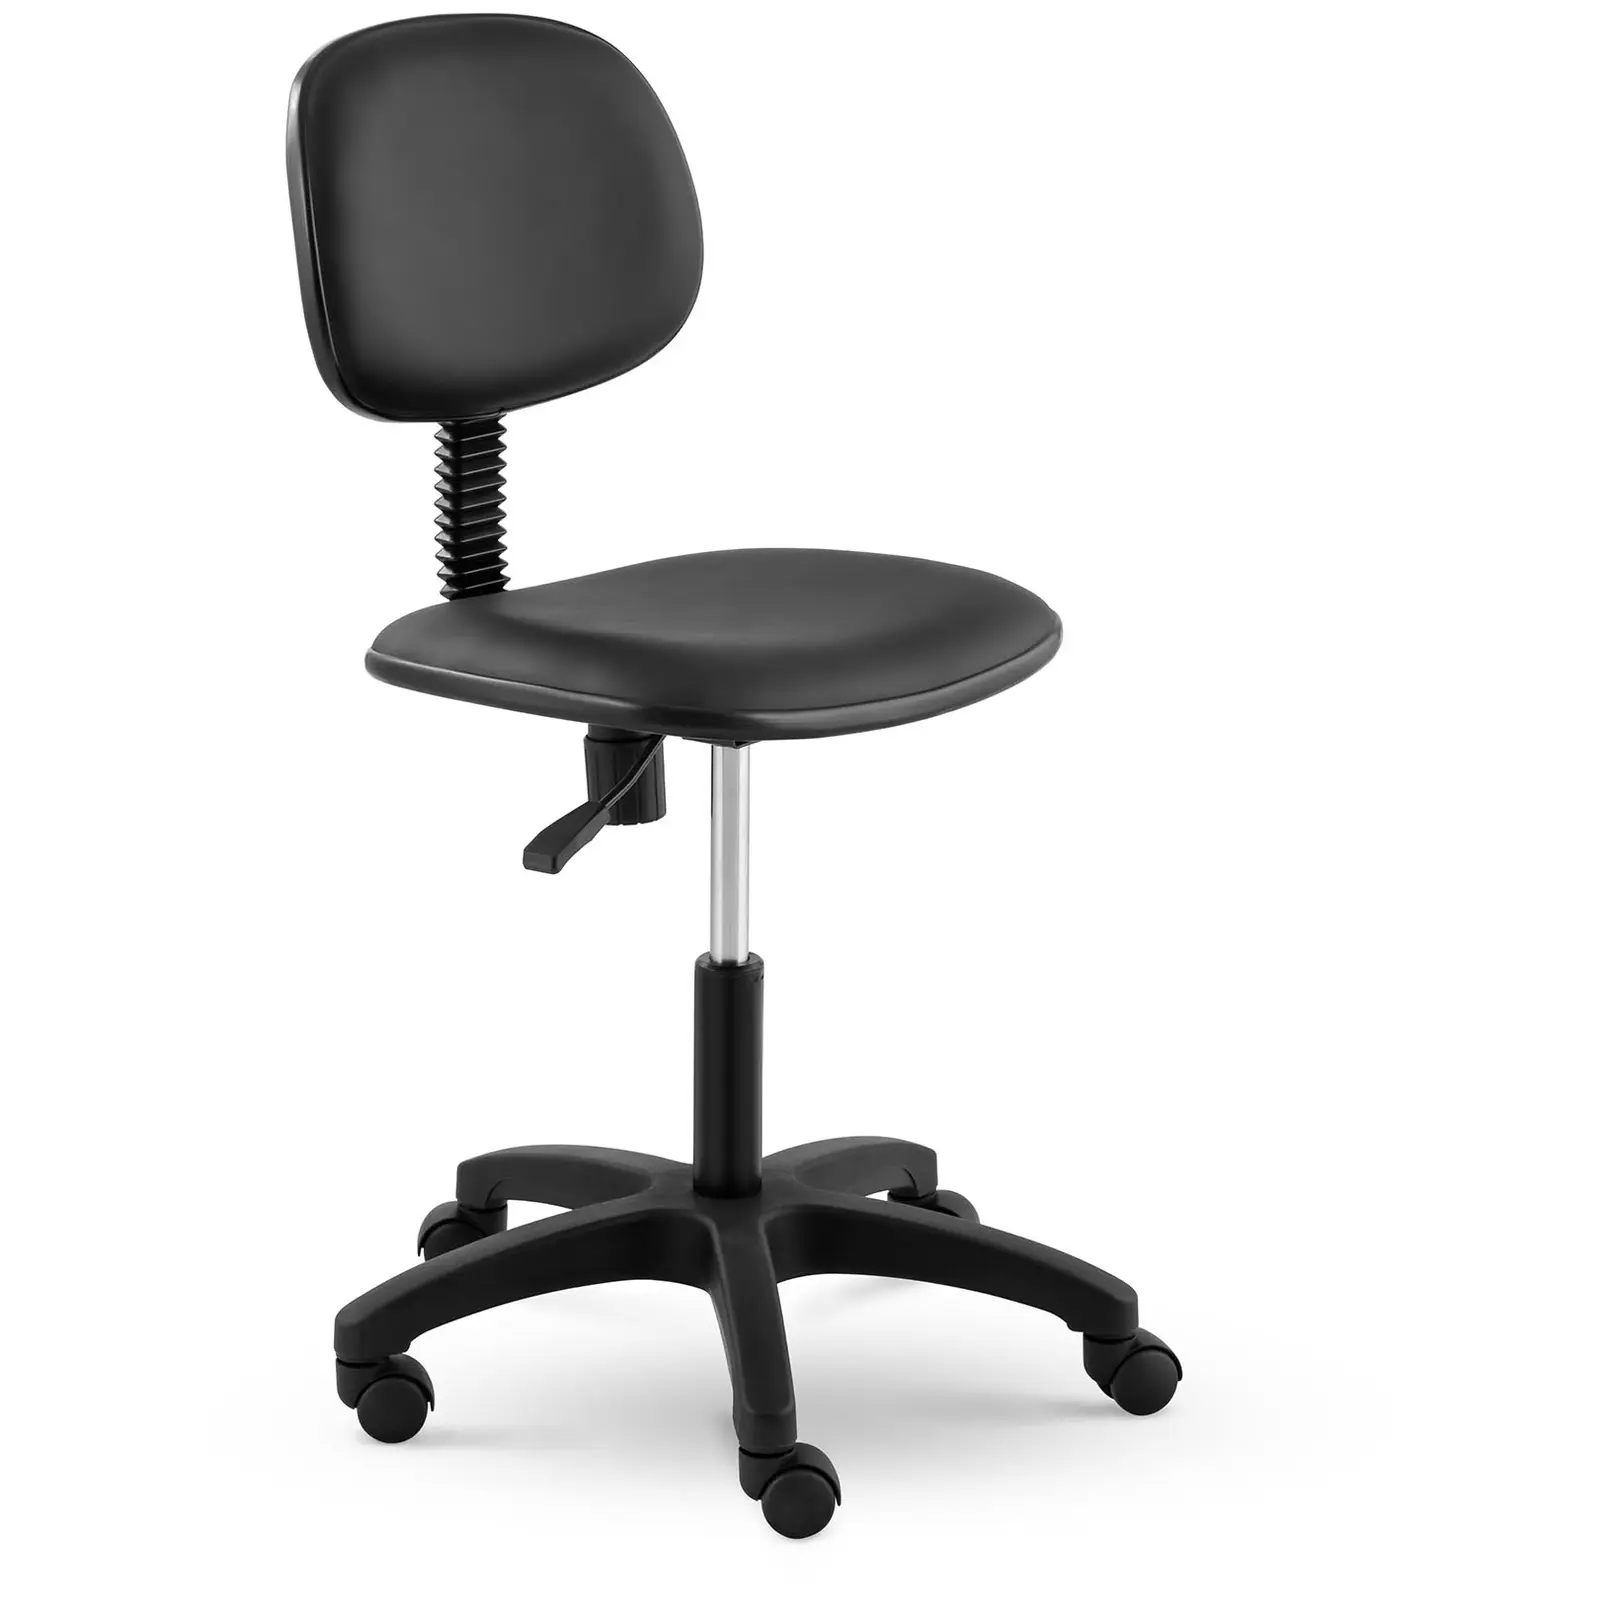 Sewing chair - 120 kg - Black - height adjustable from 450 - 590 mm